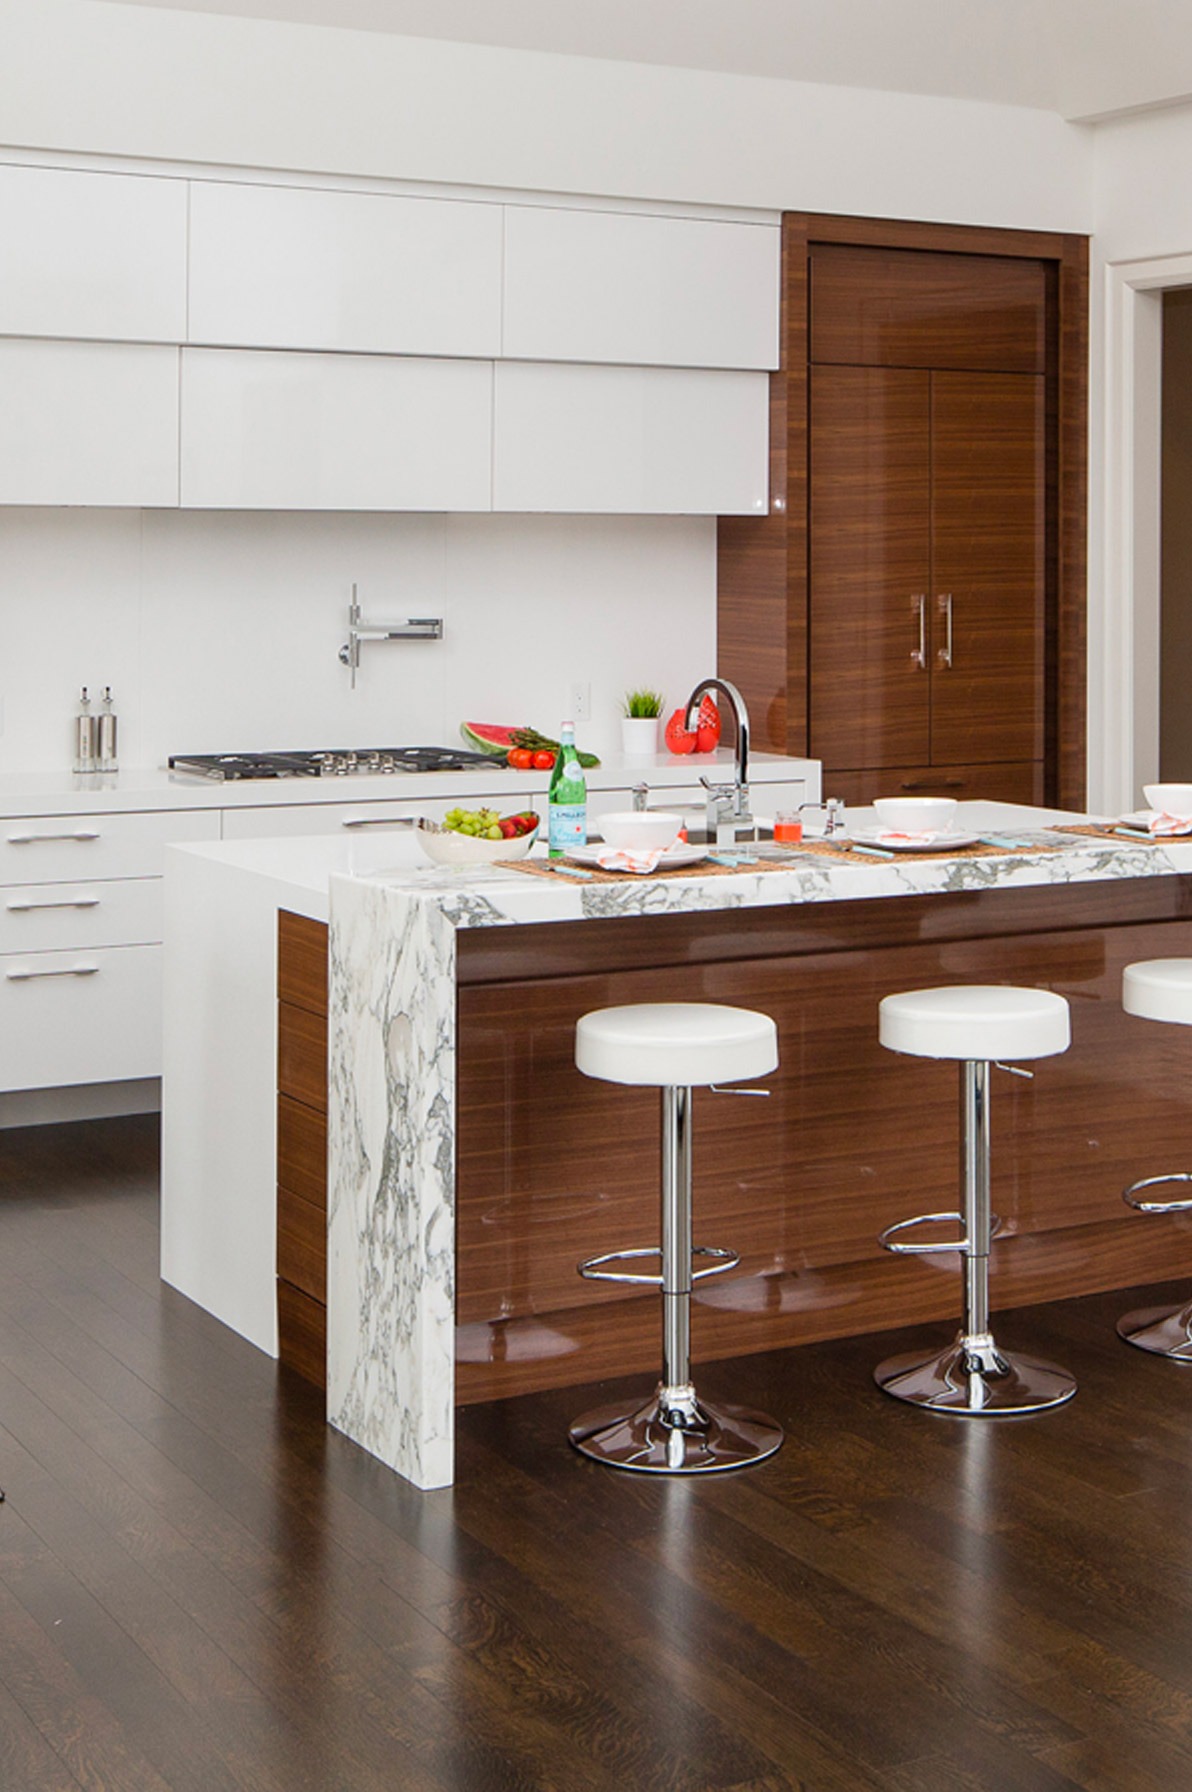 White kitchen with wood cabinets, white backsplash and marble countertop.